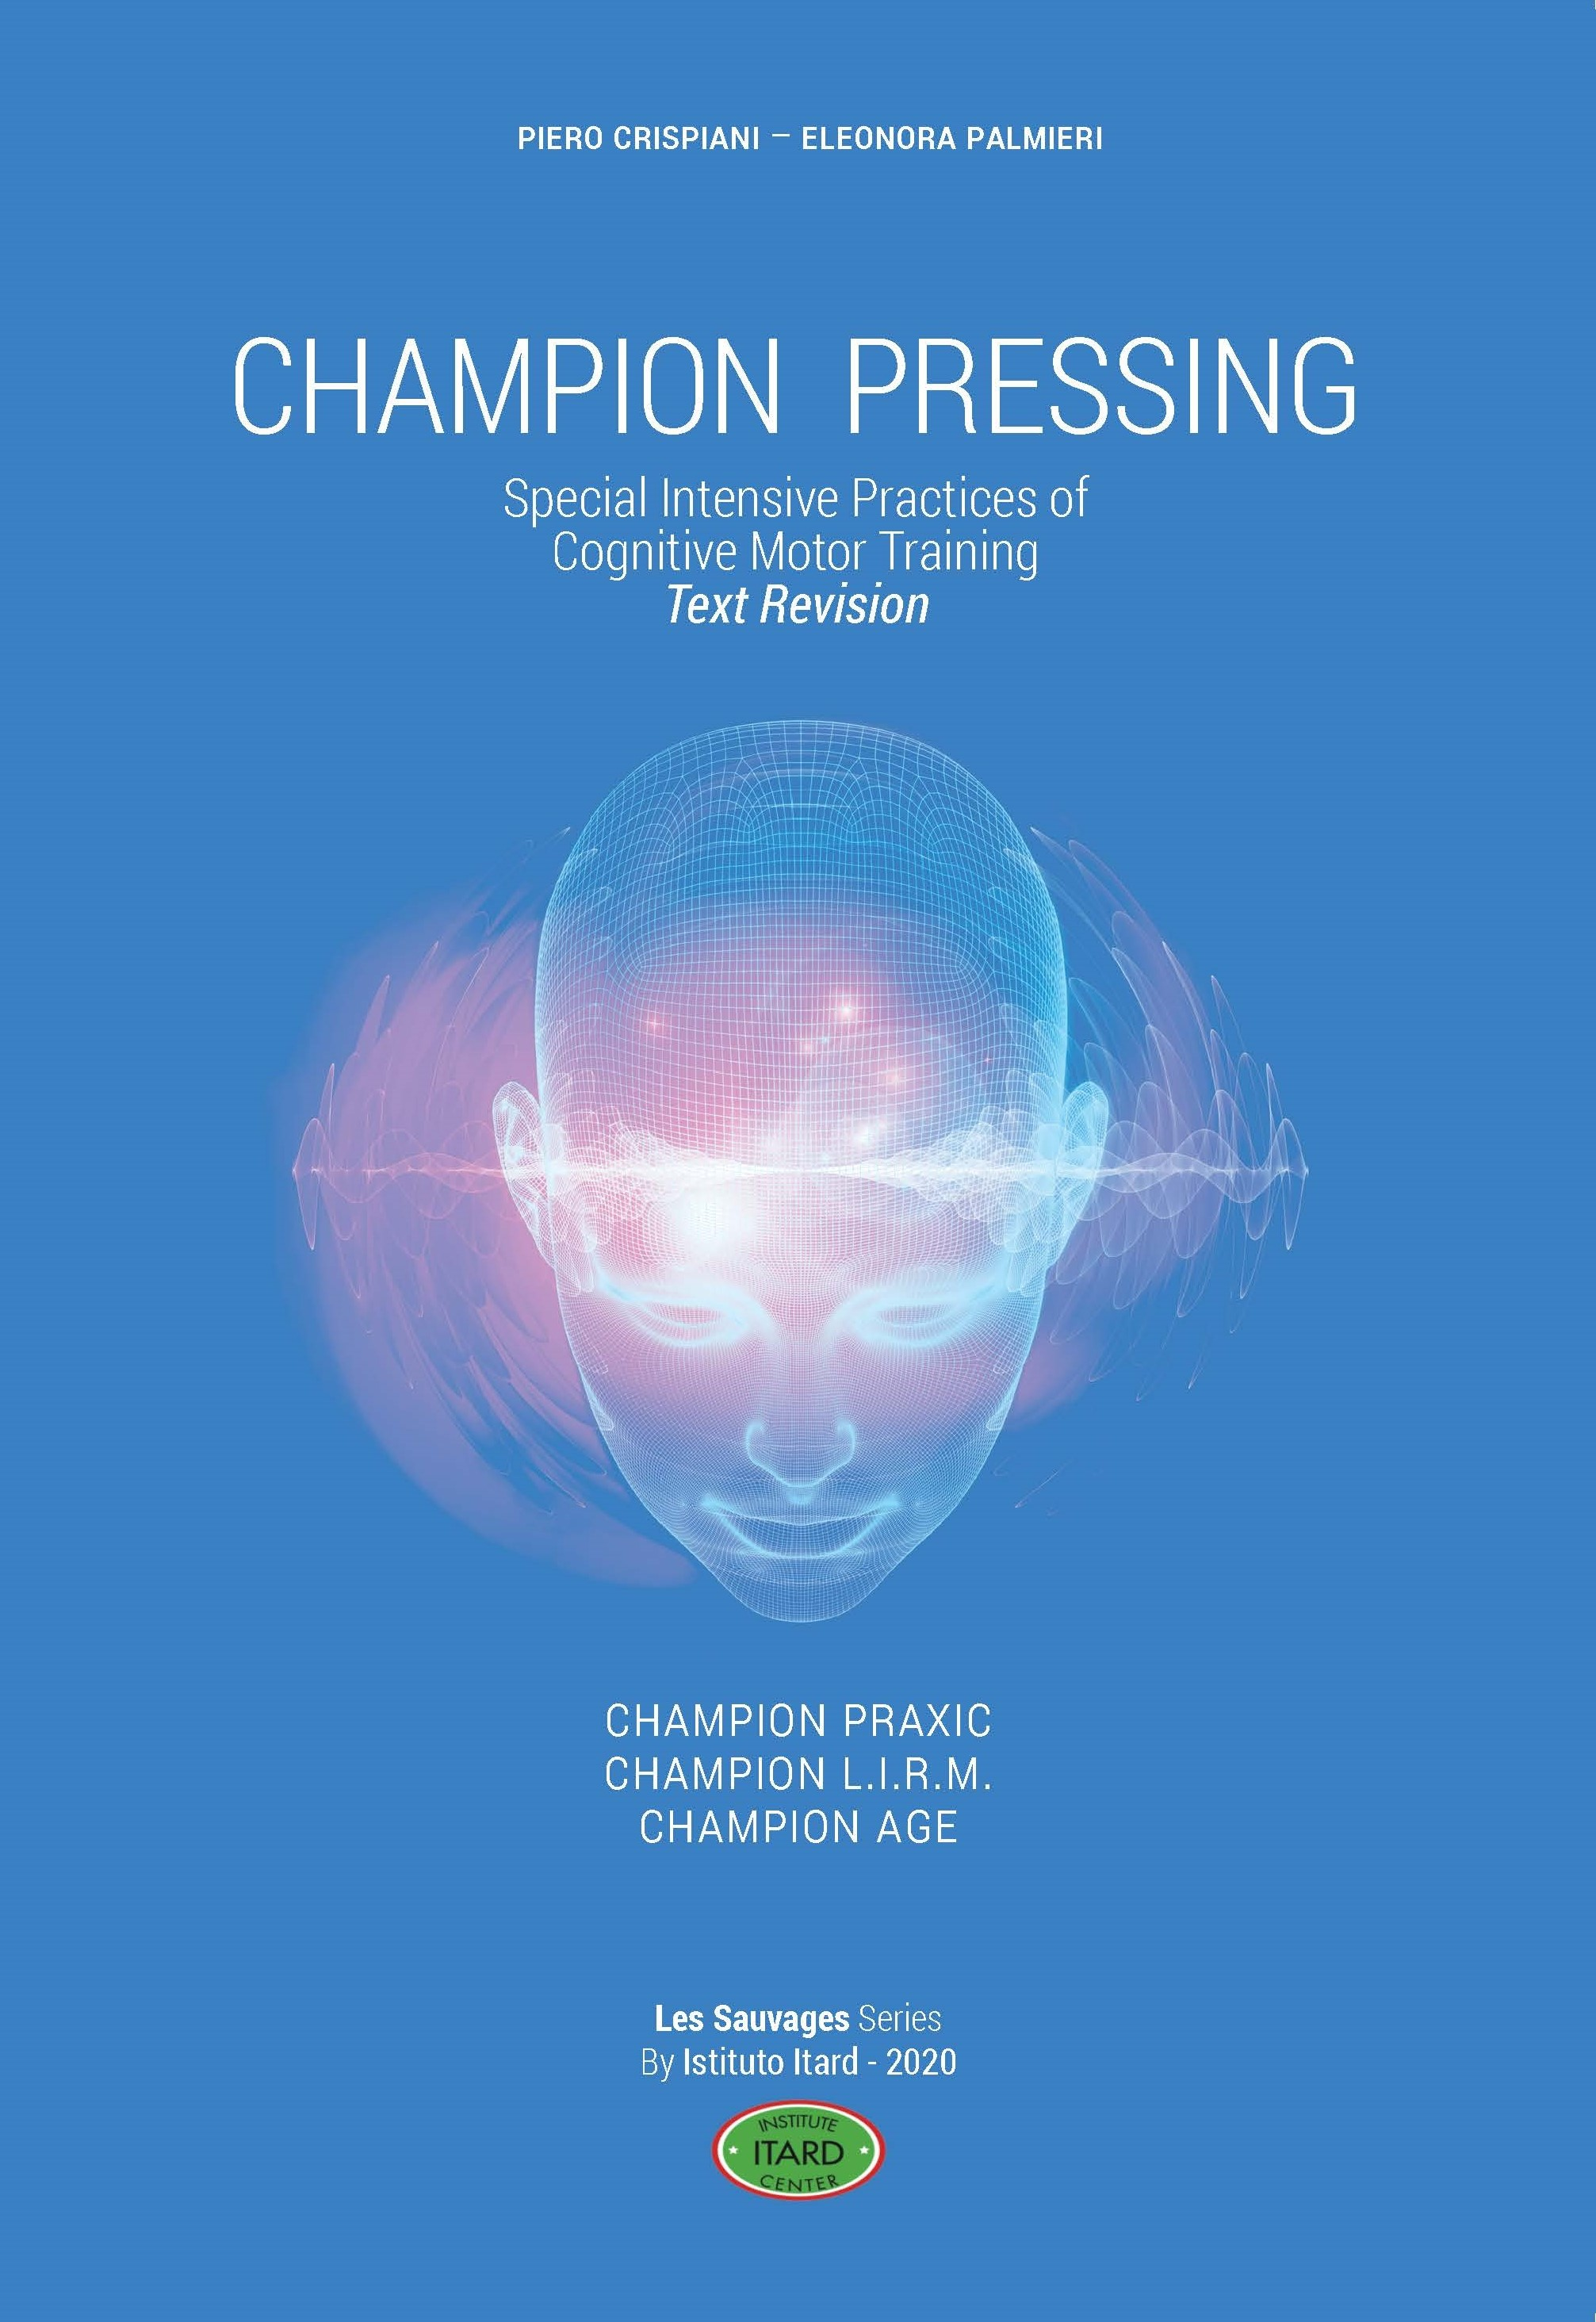 Champion Pressing - Special Intensive Practices of Cognitive Motor Training